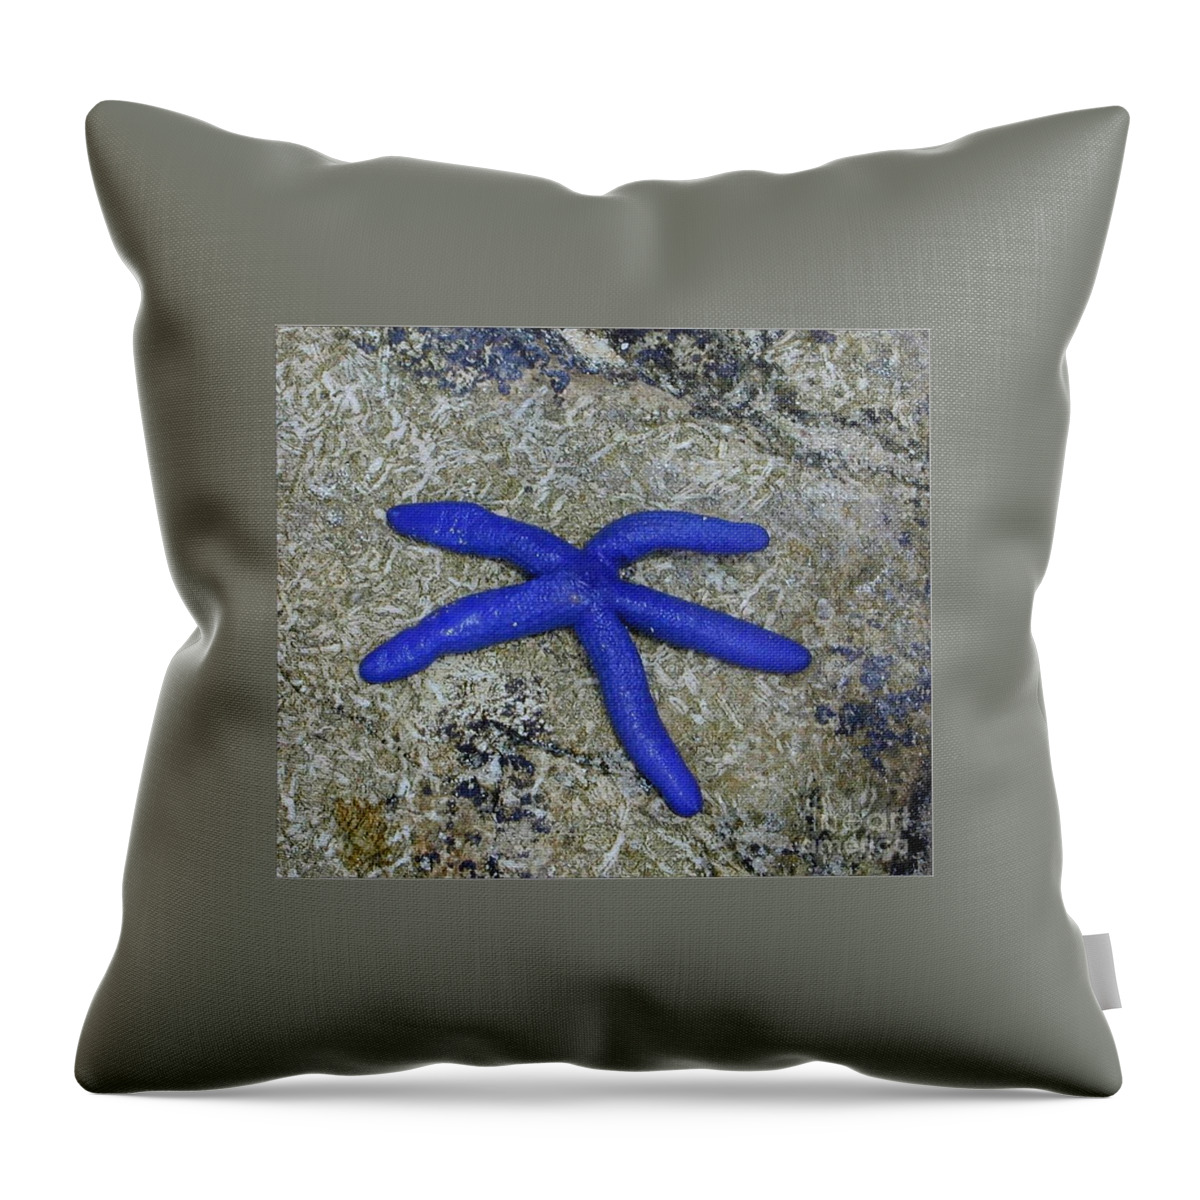 Starfish Throw Pillow featuring the photograph Blue Starfish by Lew Davis